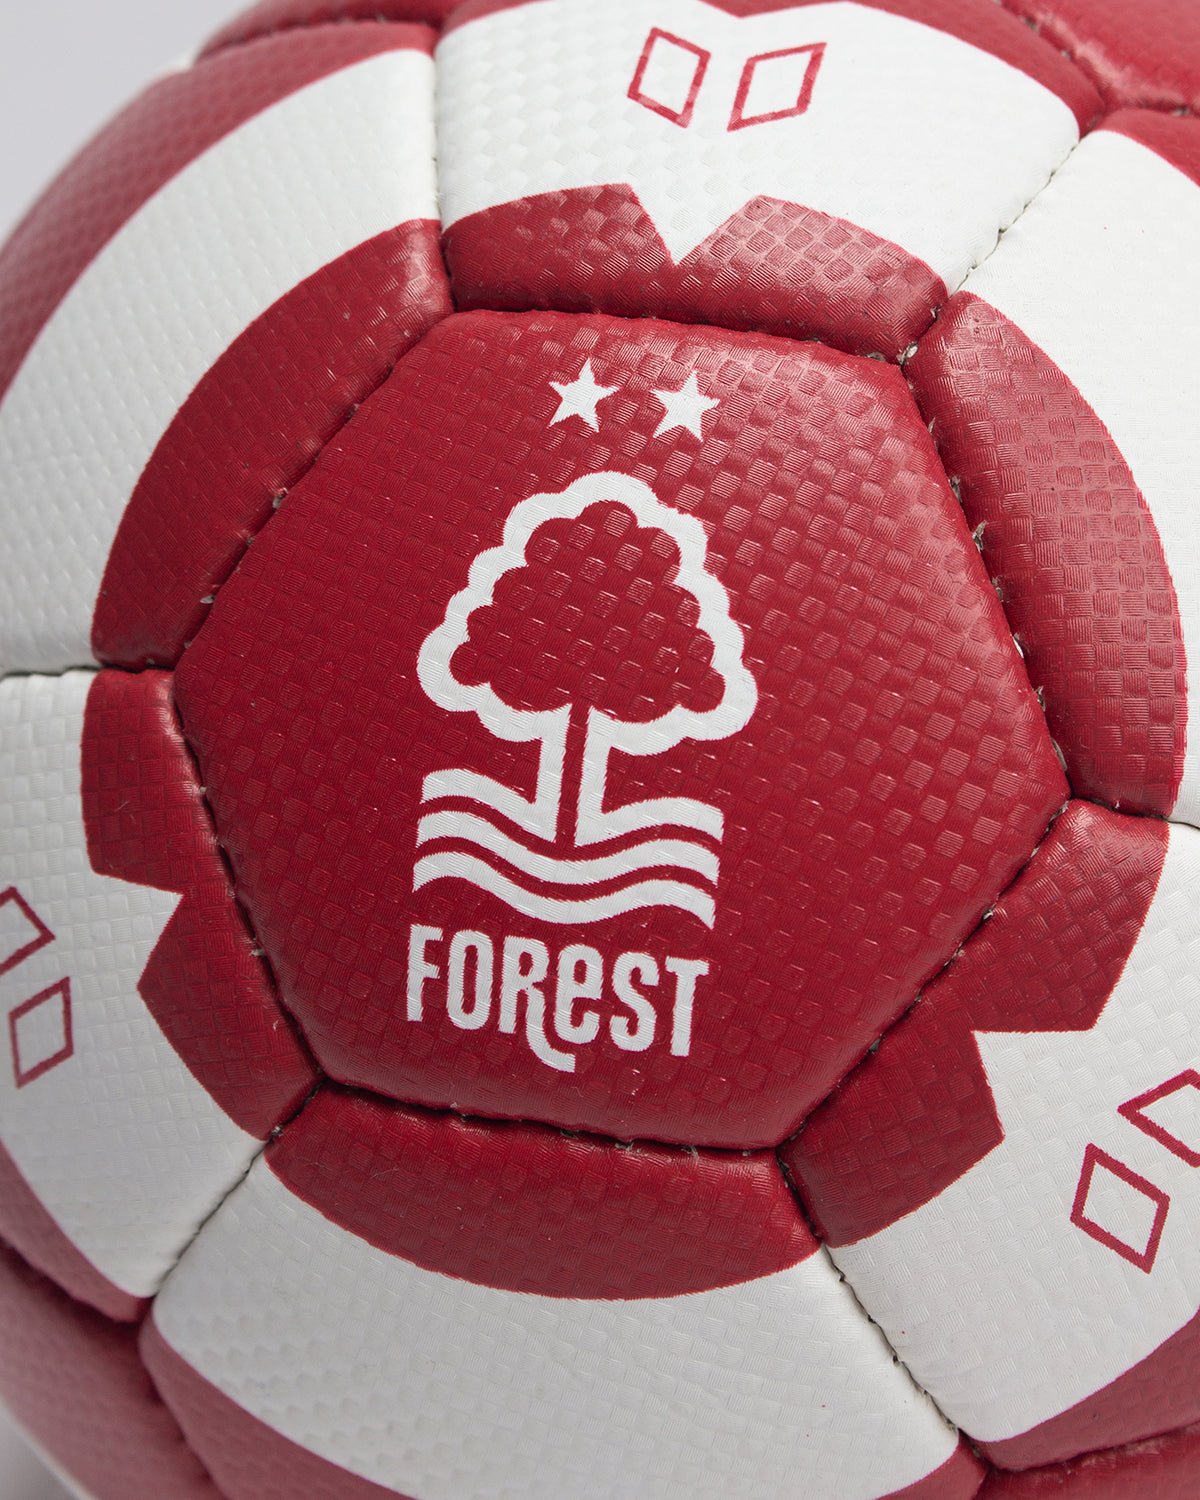 NFFC Red Hoop Football - Size 5 - Nottingham Forest FC